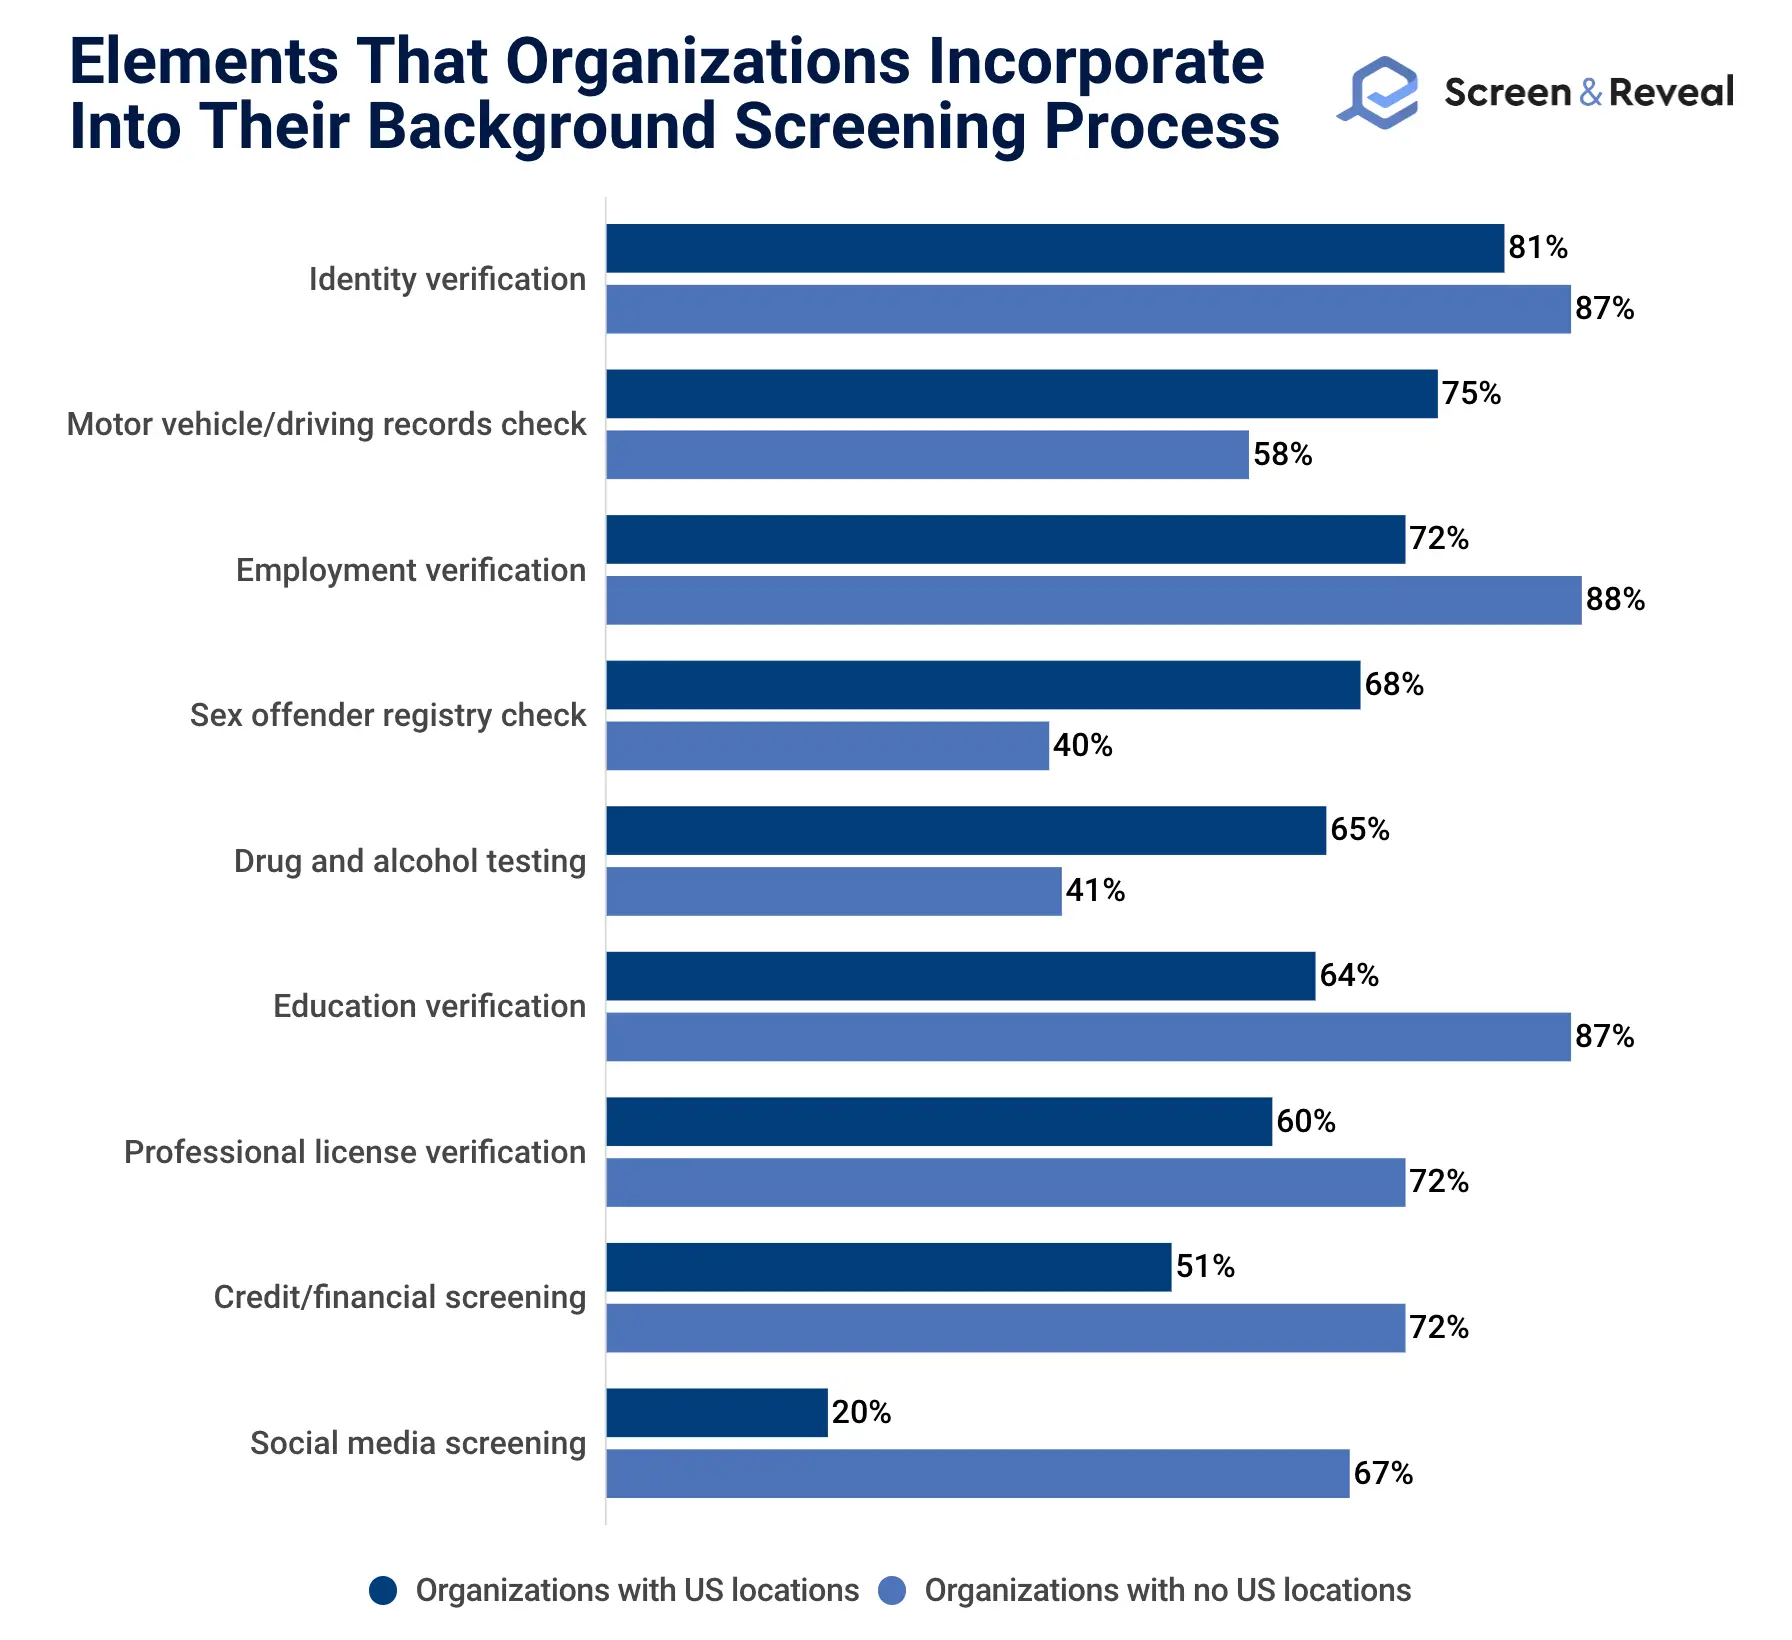 Elements That Organizations Incorporate Into Their Background Screening Process